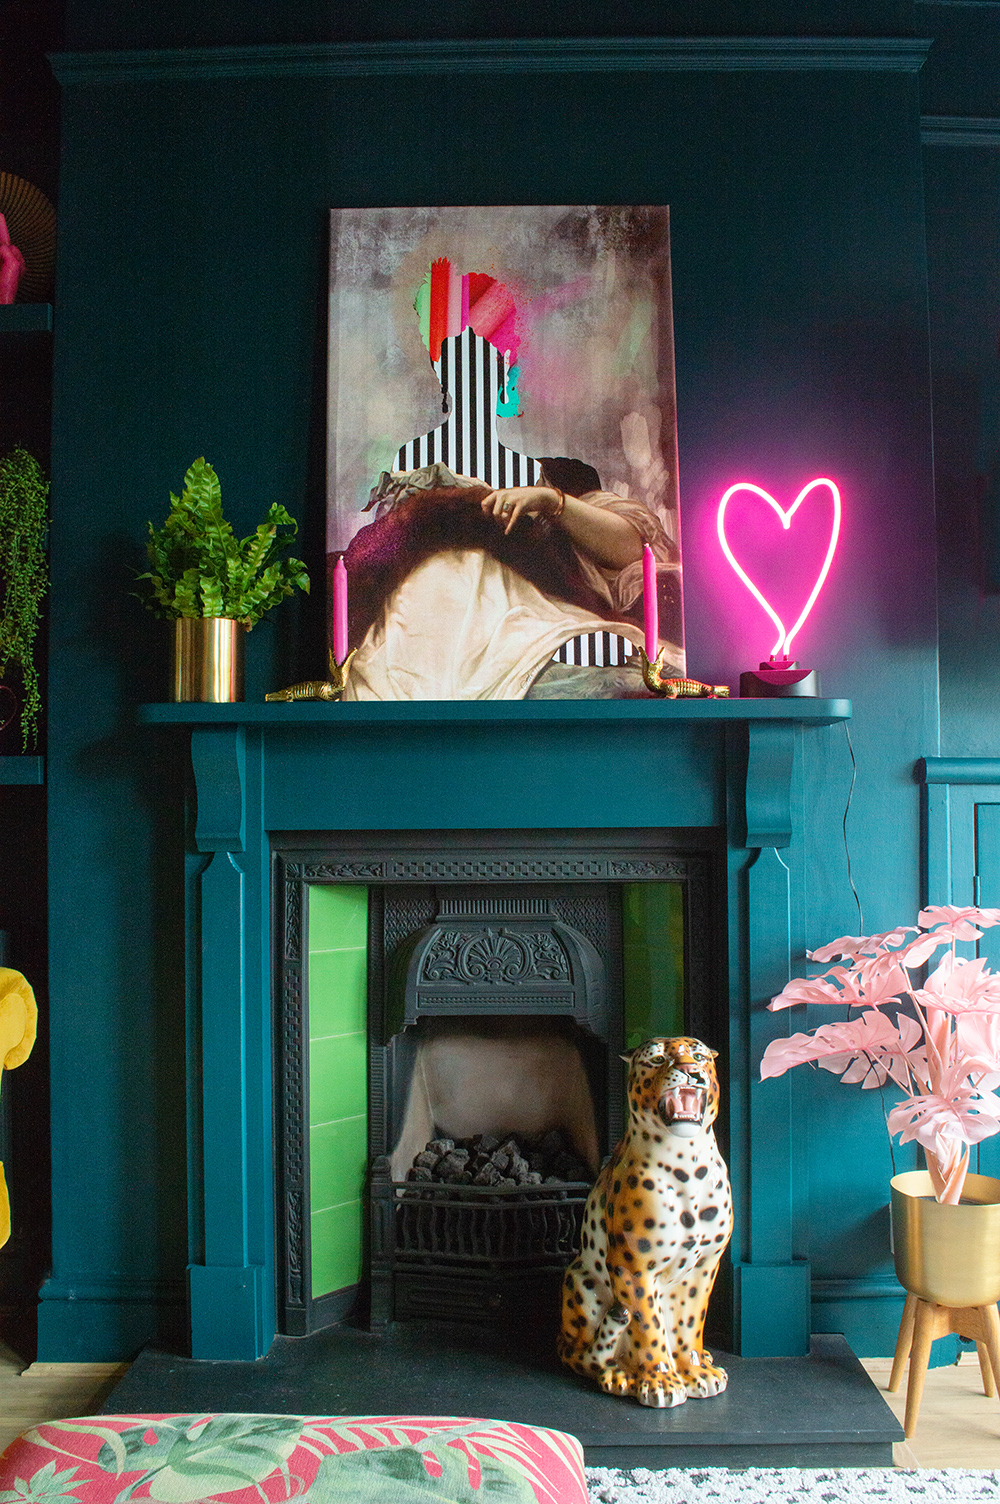 Eclectic living room inspiration. Teal walls paired with colourful art and quirky accessories.